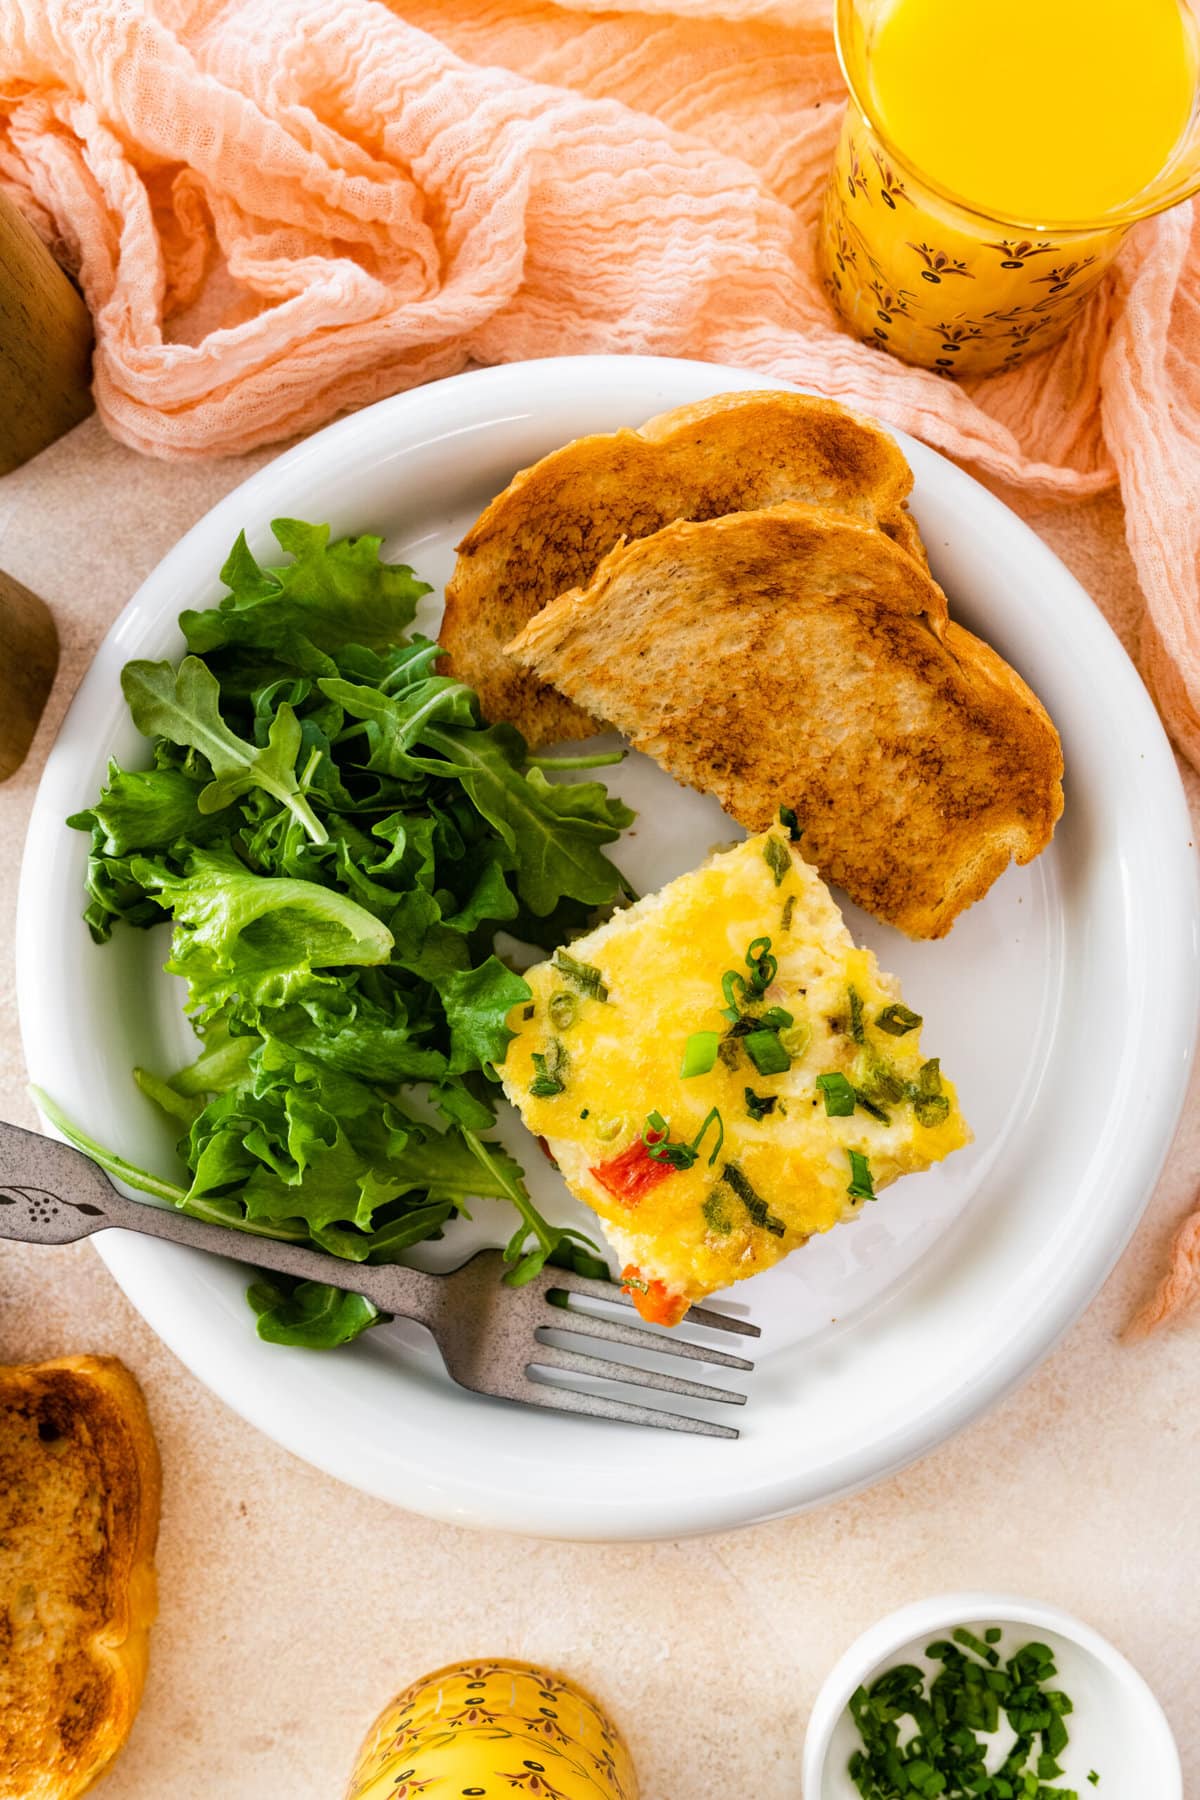 slice of breakfast casserole on a plate with toast and green salad.